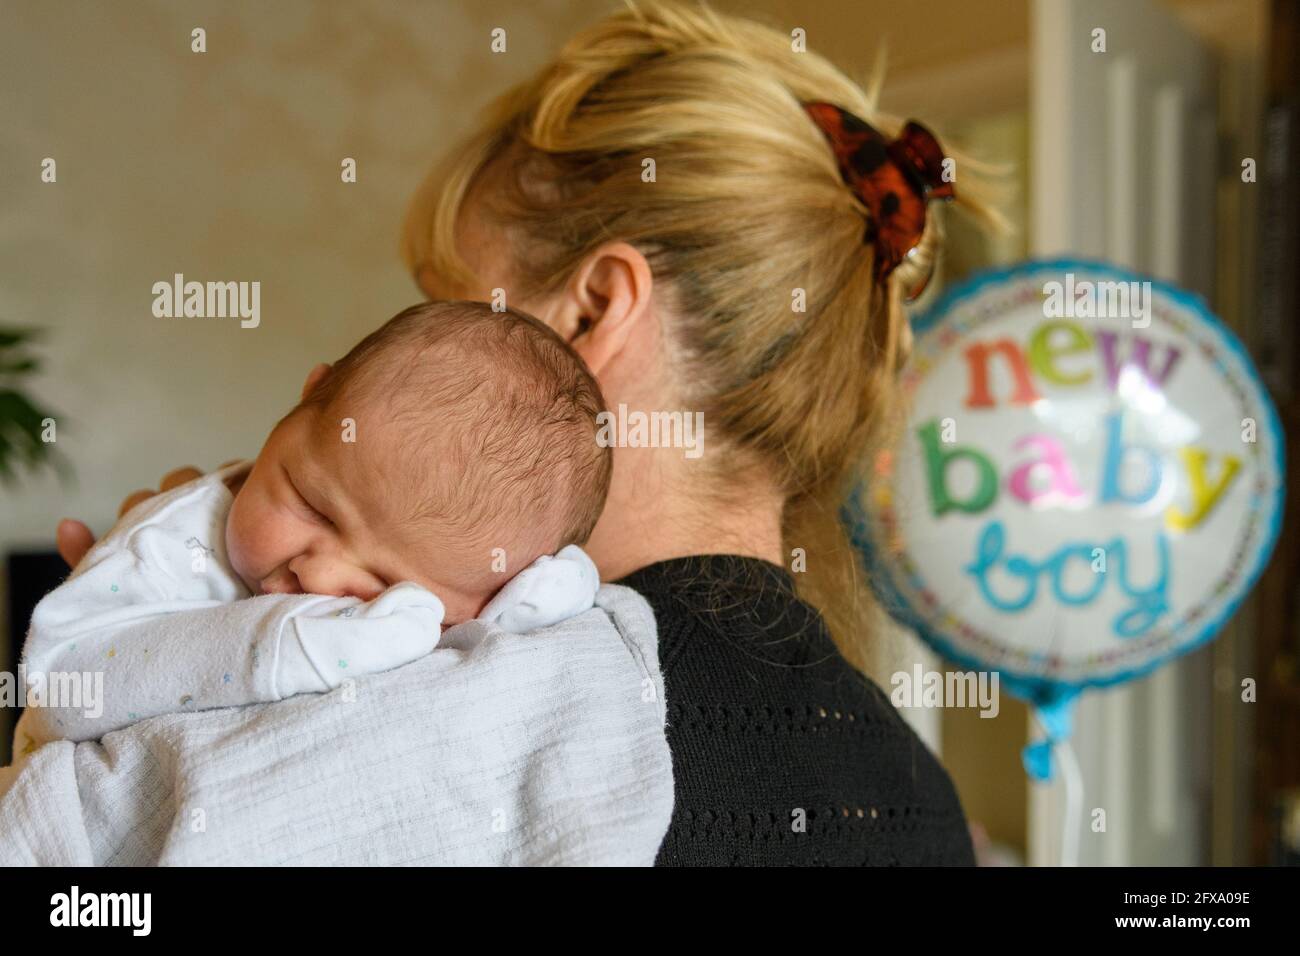 Welcoming a new baby boy Stock Photo